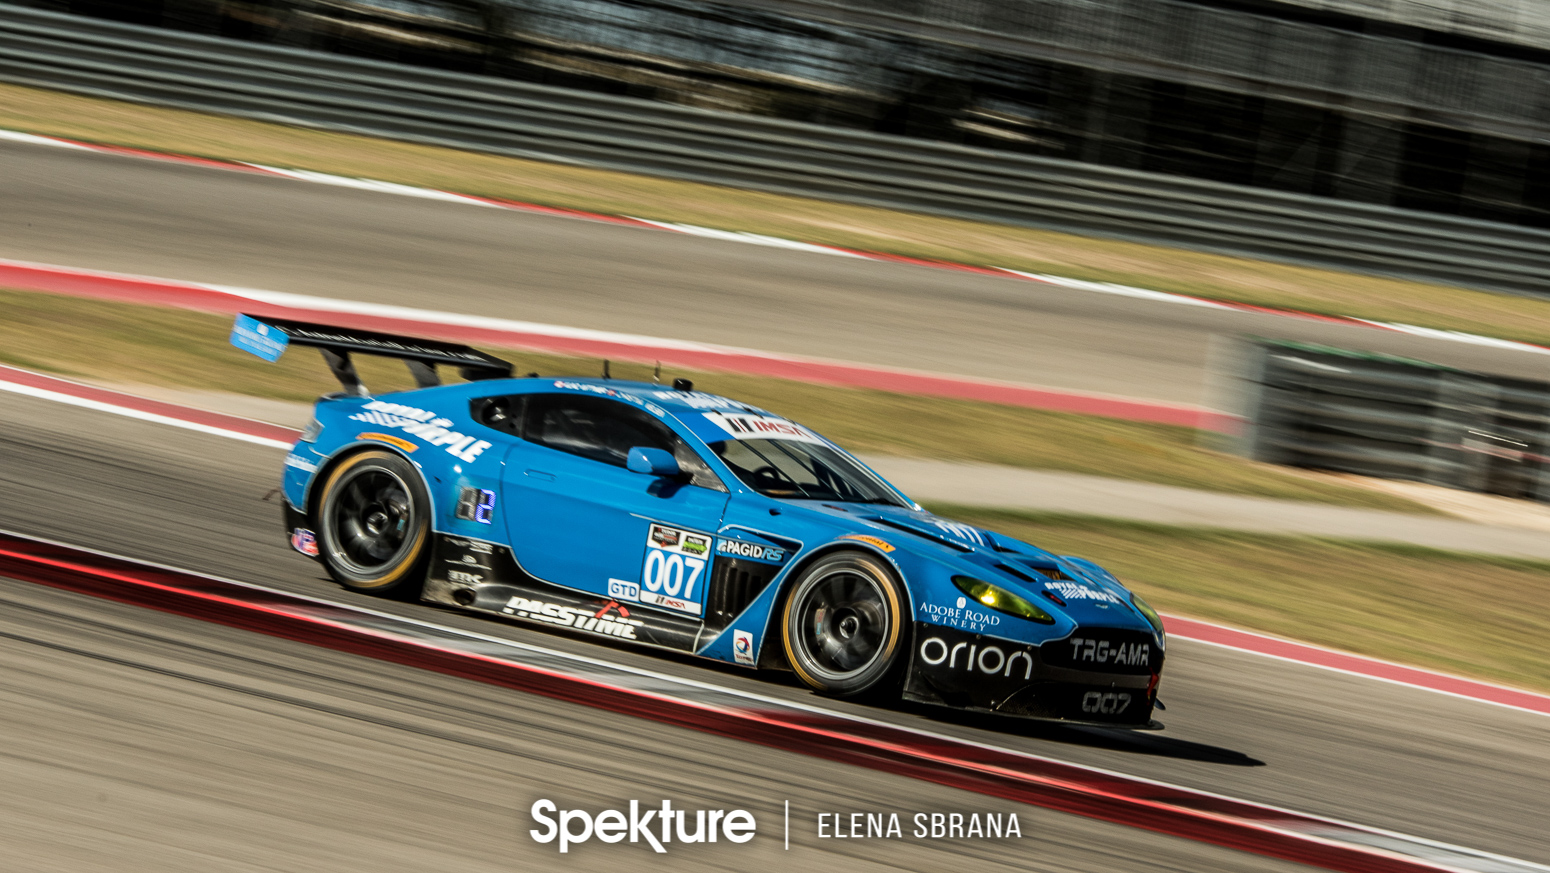 Earchphoto - The TRG-AMR Aston Martin of Christina Nielsen on the track in 2015.